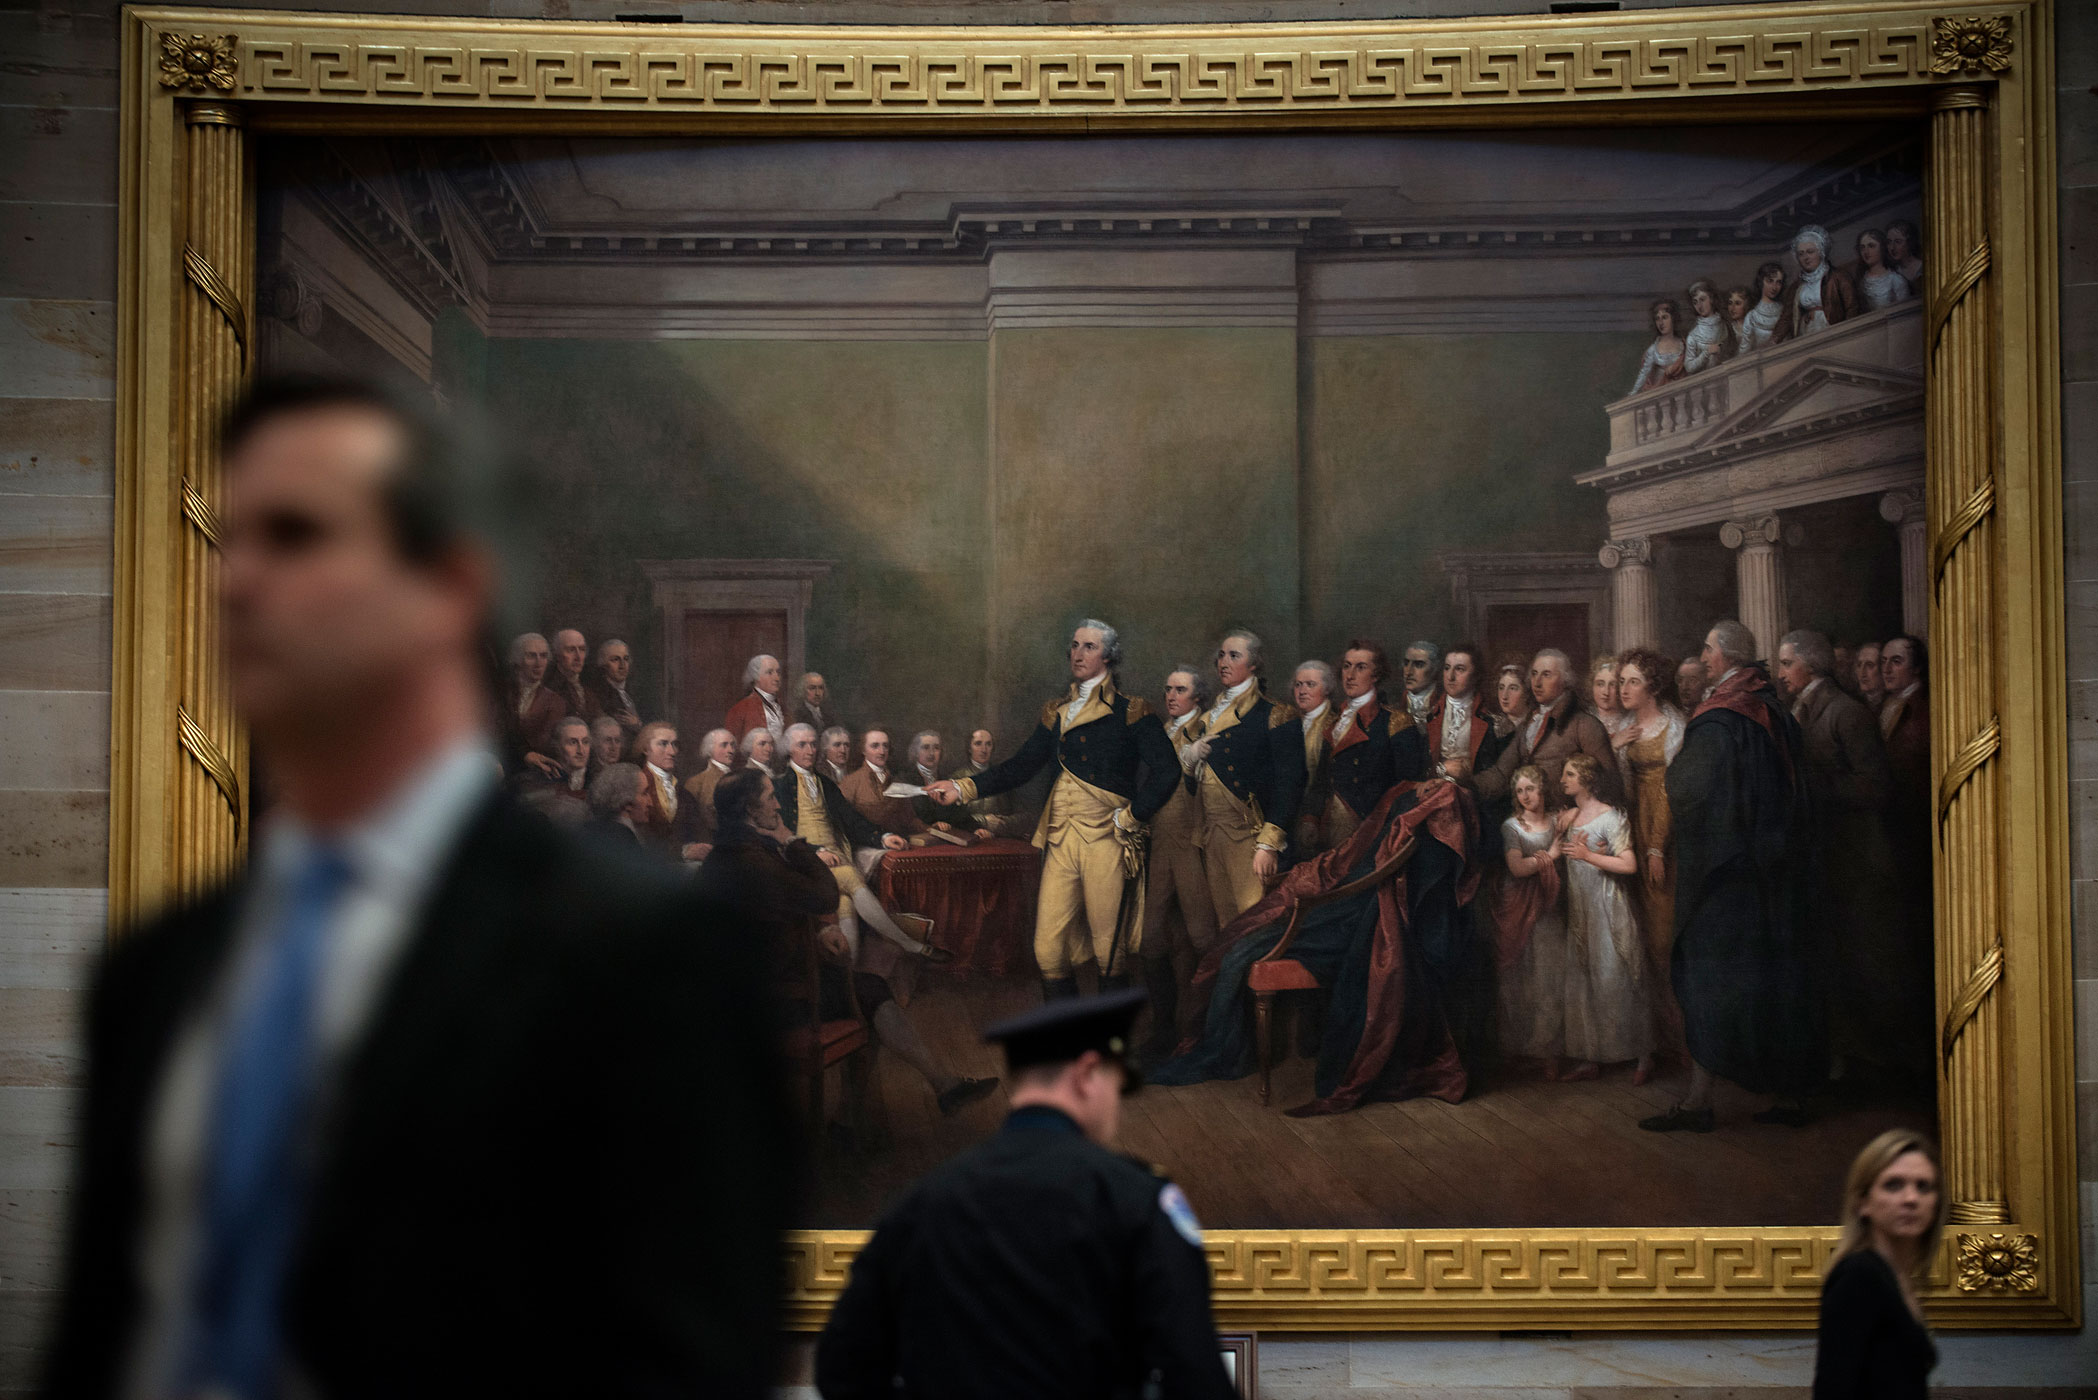 Feb. 12, 2013. People walk through the Capitol's Rotunda prior to President Obama's State of the Union address to a joint session of the U.S. Congress in Washington.